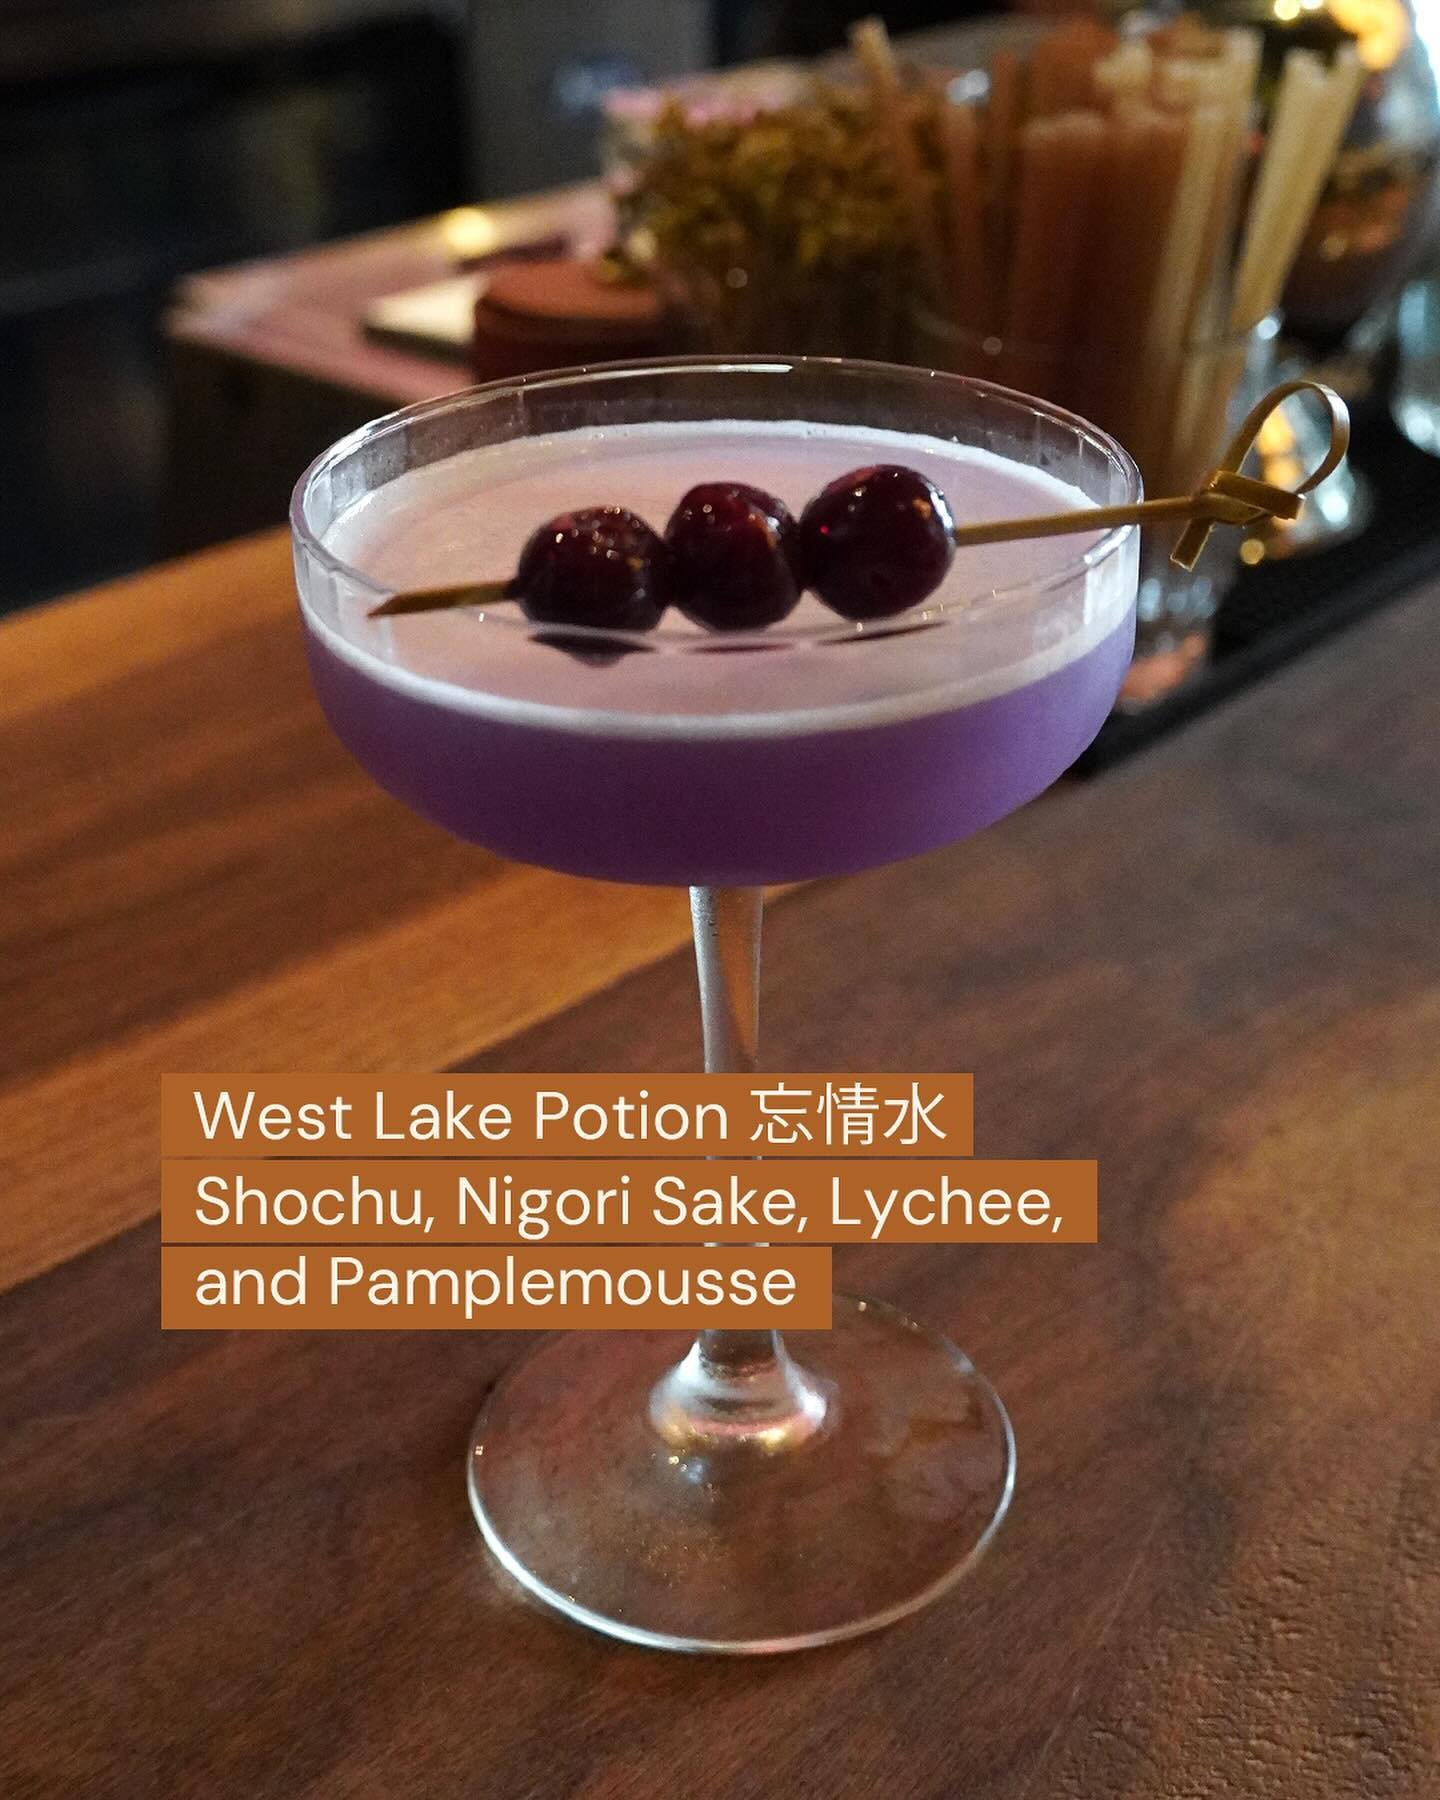 NEW DRINK ALERT! 🚨West Lake Potion 忘情水 with shochu, nigori sake, lychee, pamplemousse 🥂 Just the latest addition to our full menu featuring non-alcoholic and Low-ABV cocktail, beer, and wine.

Now open everyday, from 5-9:30pm
📍56 West 22nd St, New